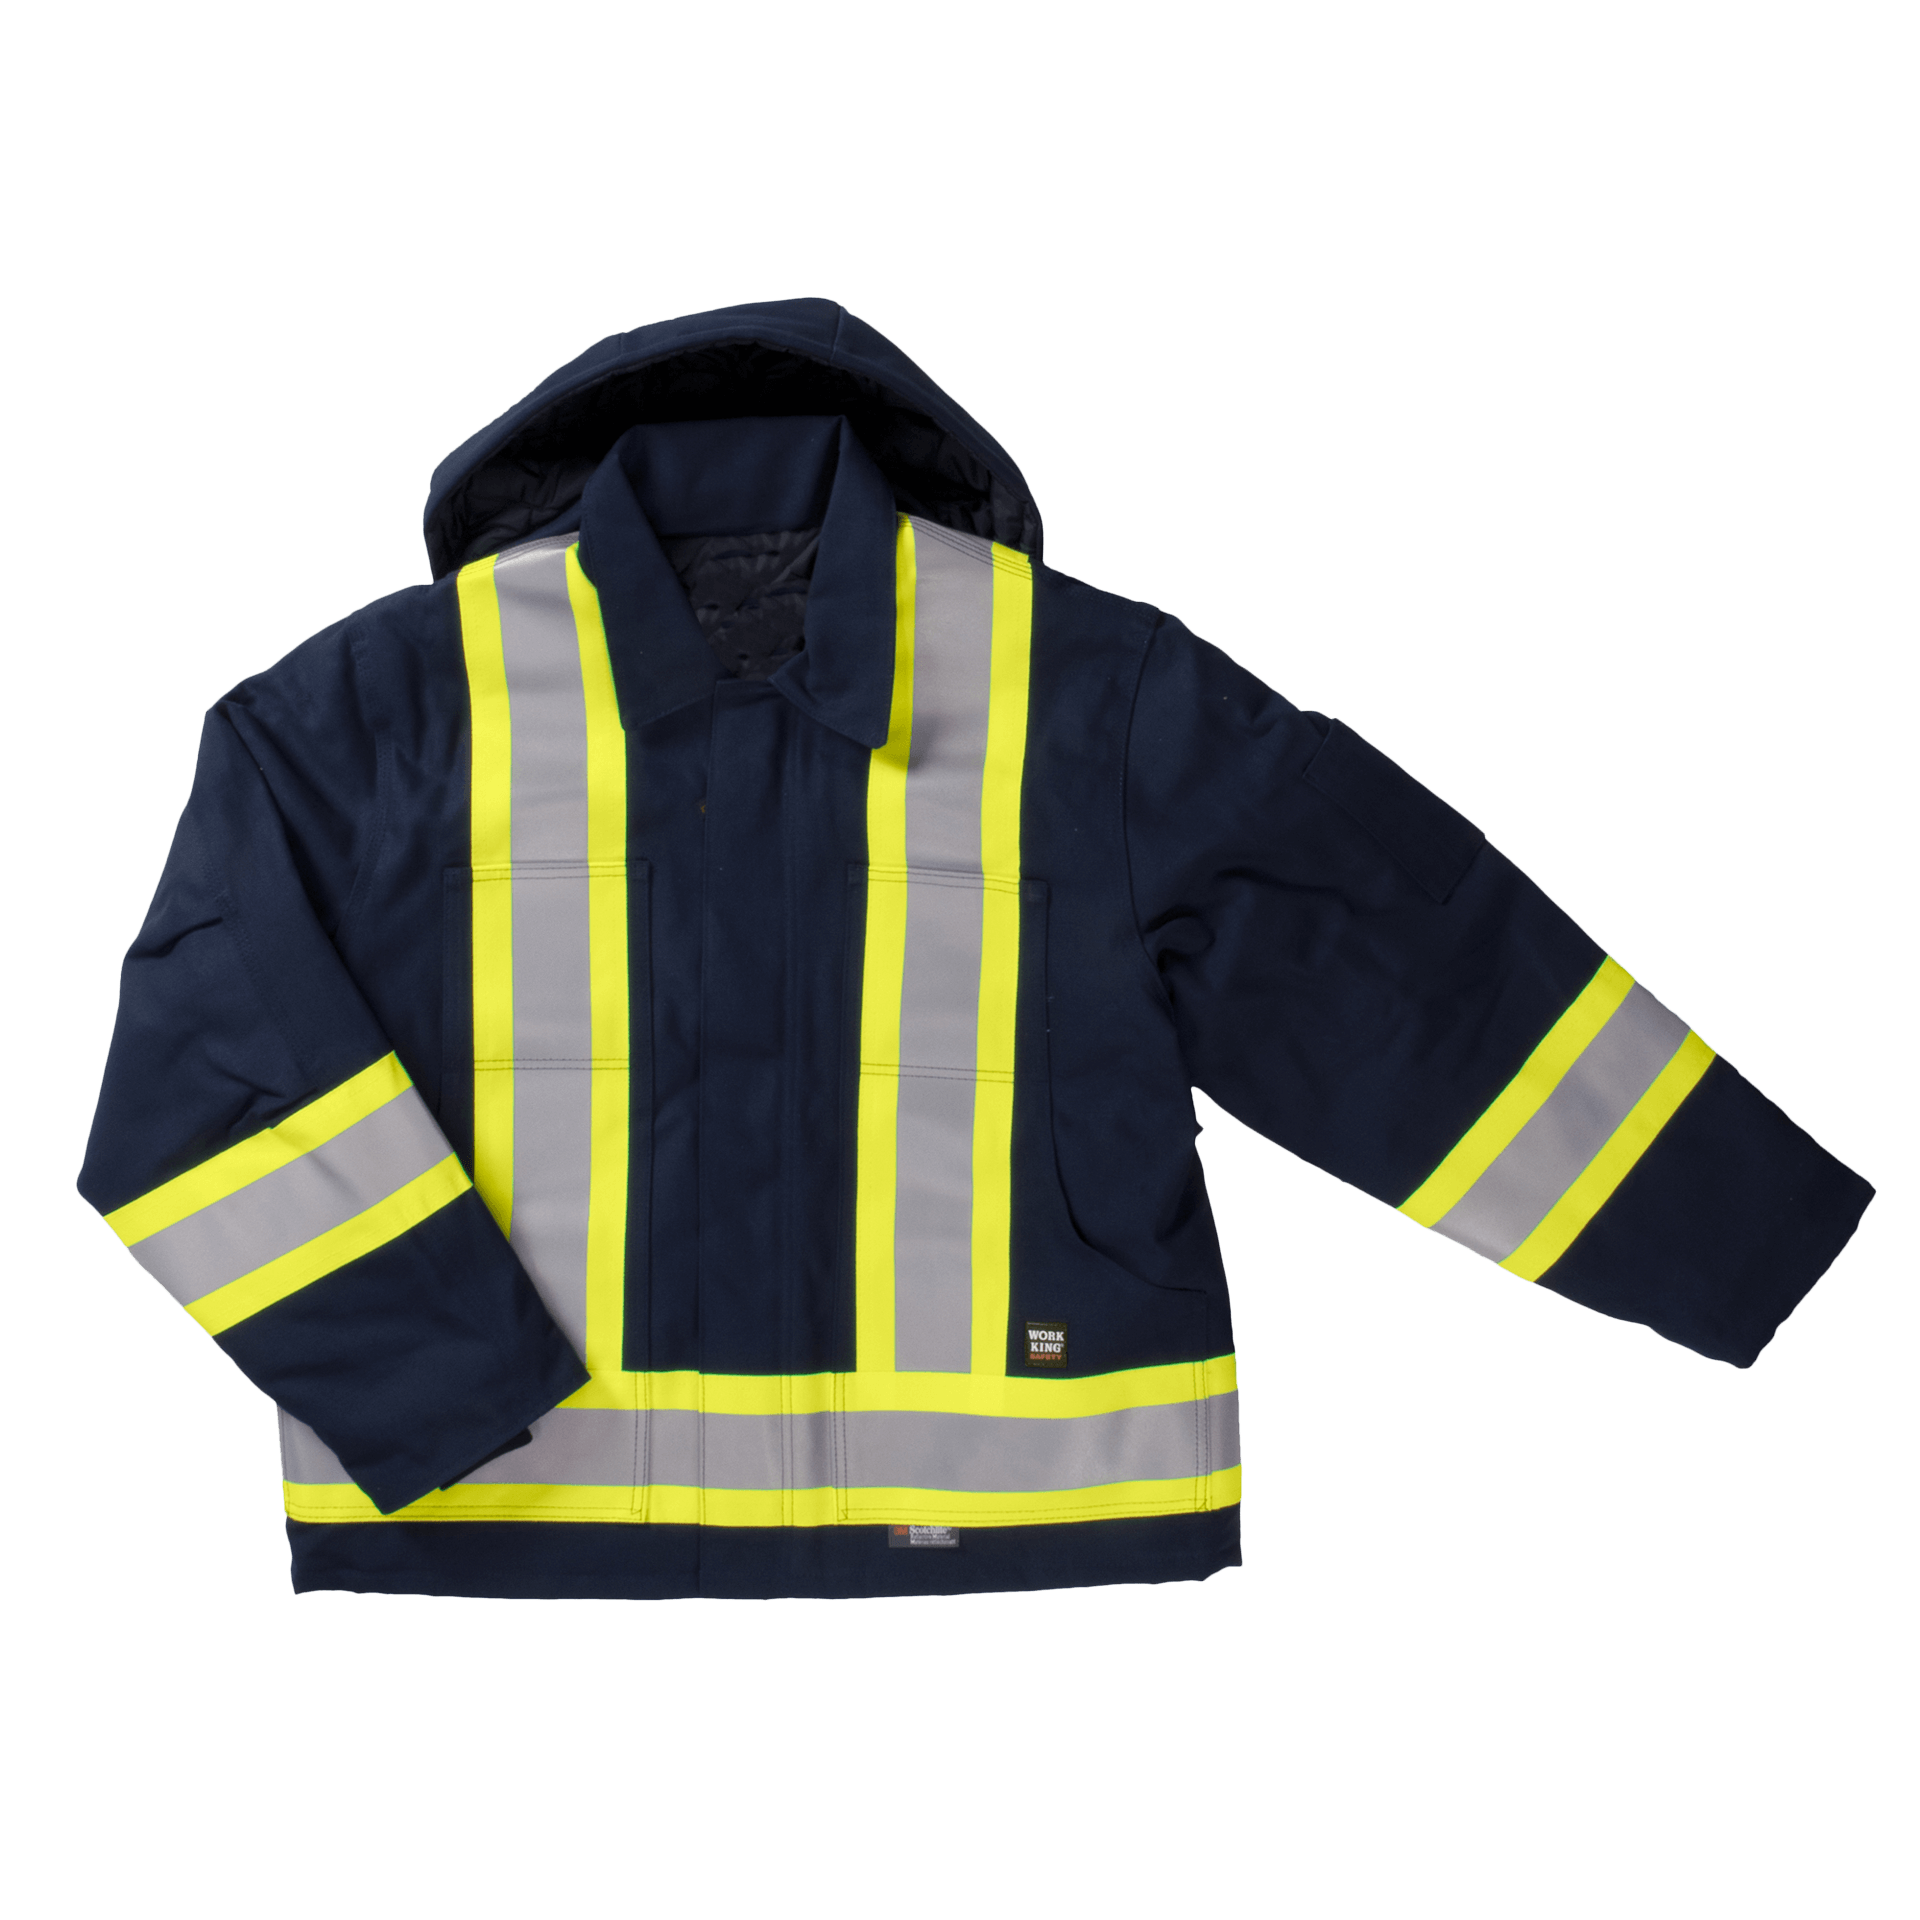 Tough Duck Duck Safety Jacket - S457 - Navy